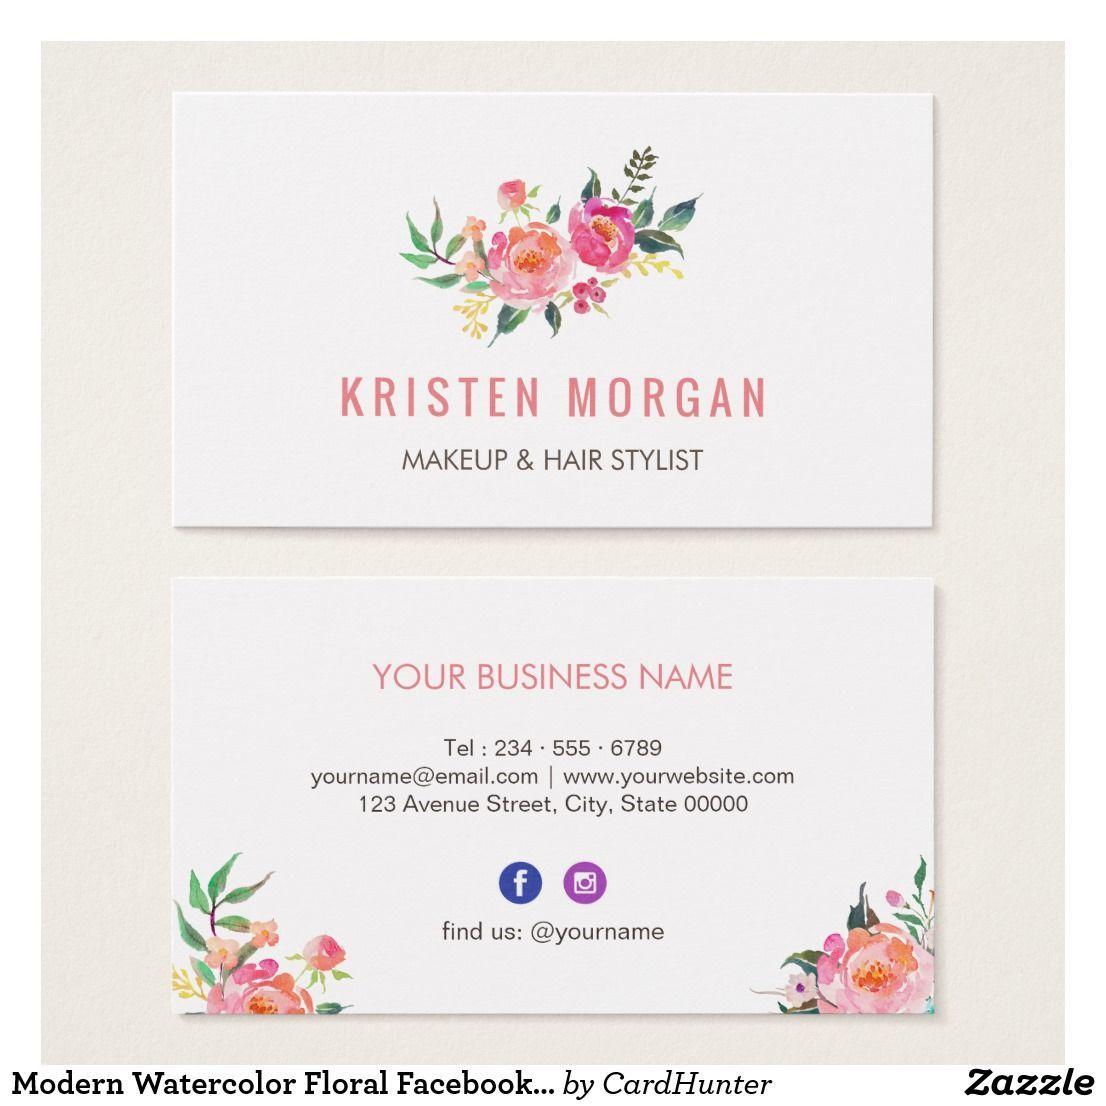 Facebook and Instagram for Business Card Logo - Modern Watercolor Floral Facebook Instagram Icon Business Card